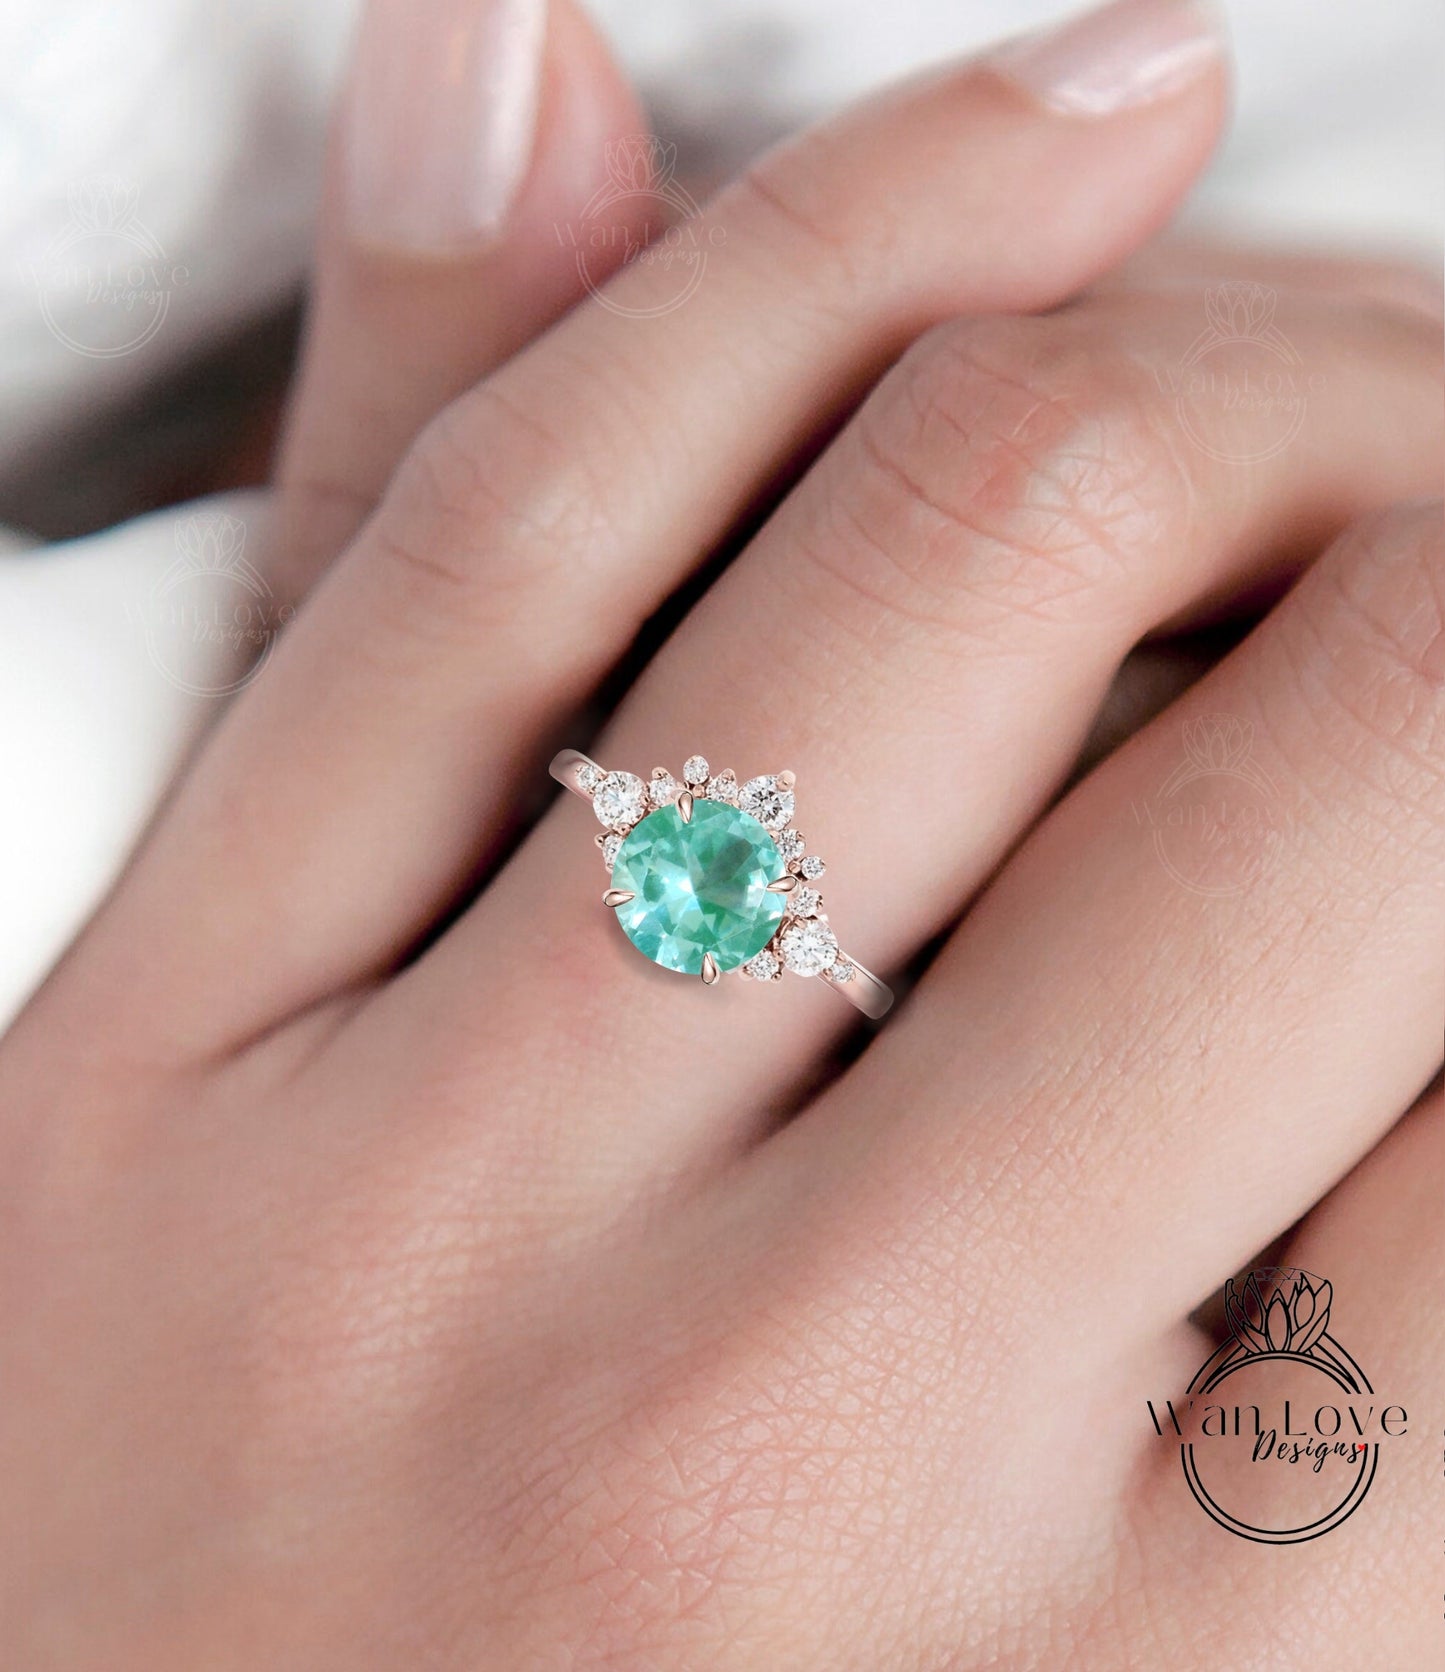 Teal Green Blue Spinel Cluster Half Halo engagement ring Diamonds Unique cluster White Rose Gold Ring woman Promise Anniversary Gift Wan Love Designs